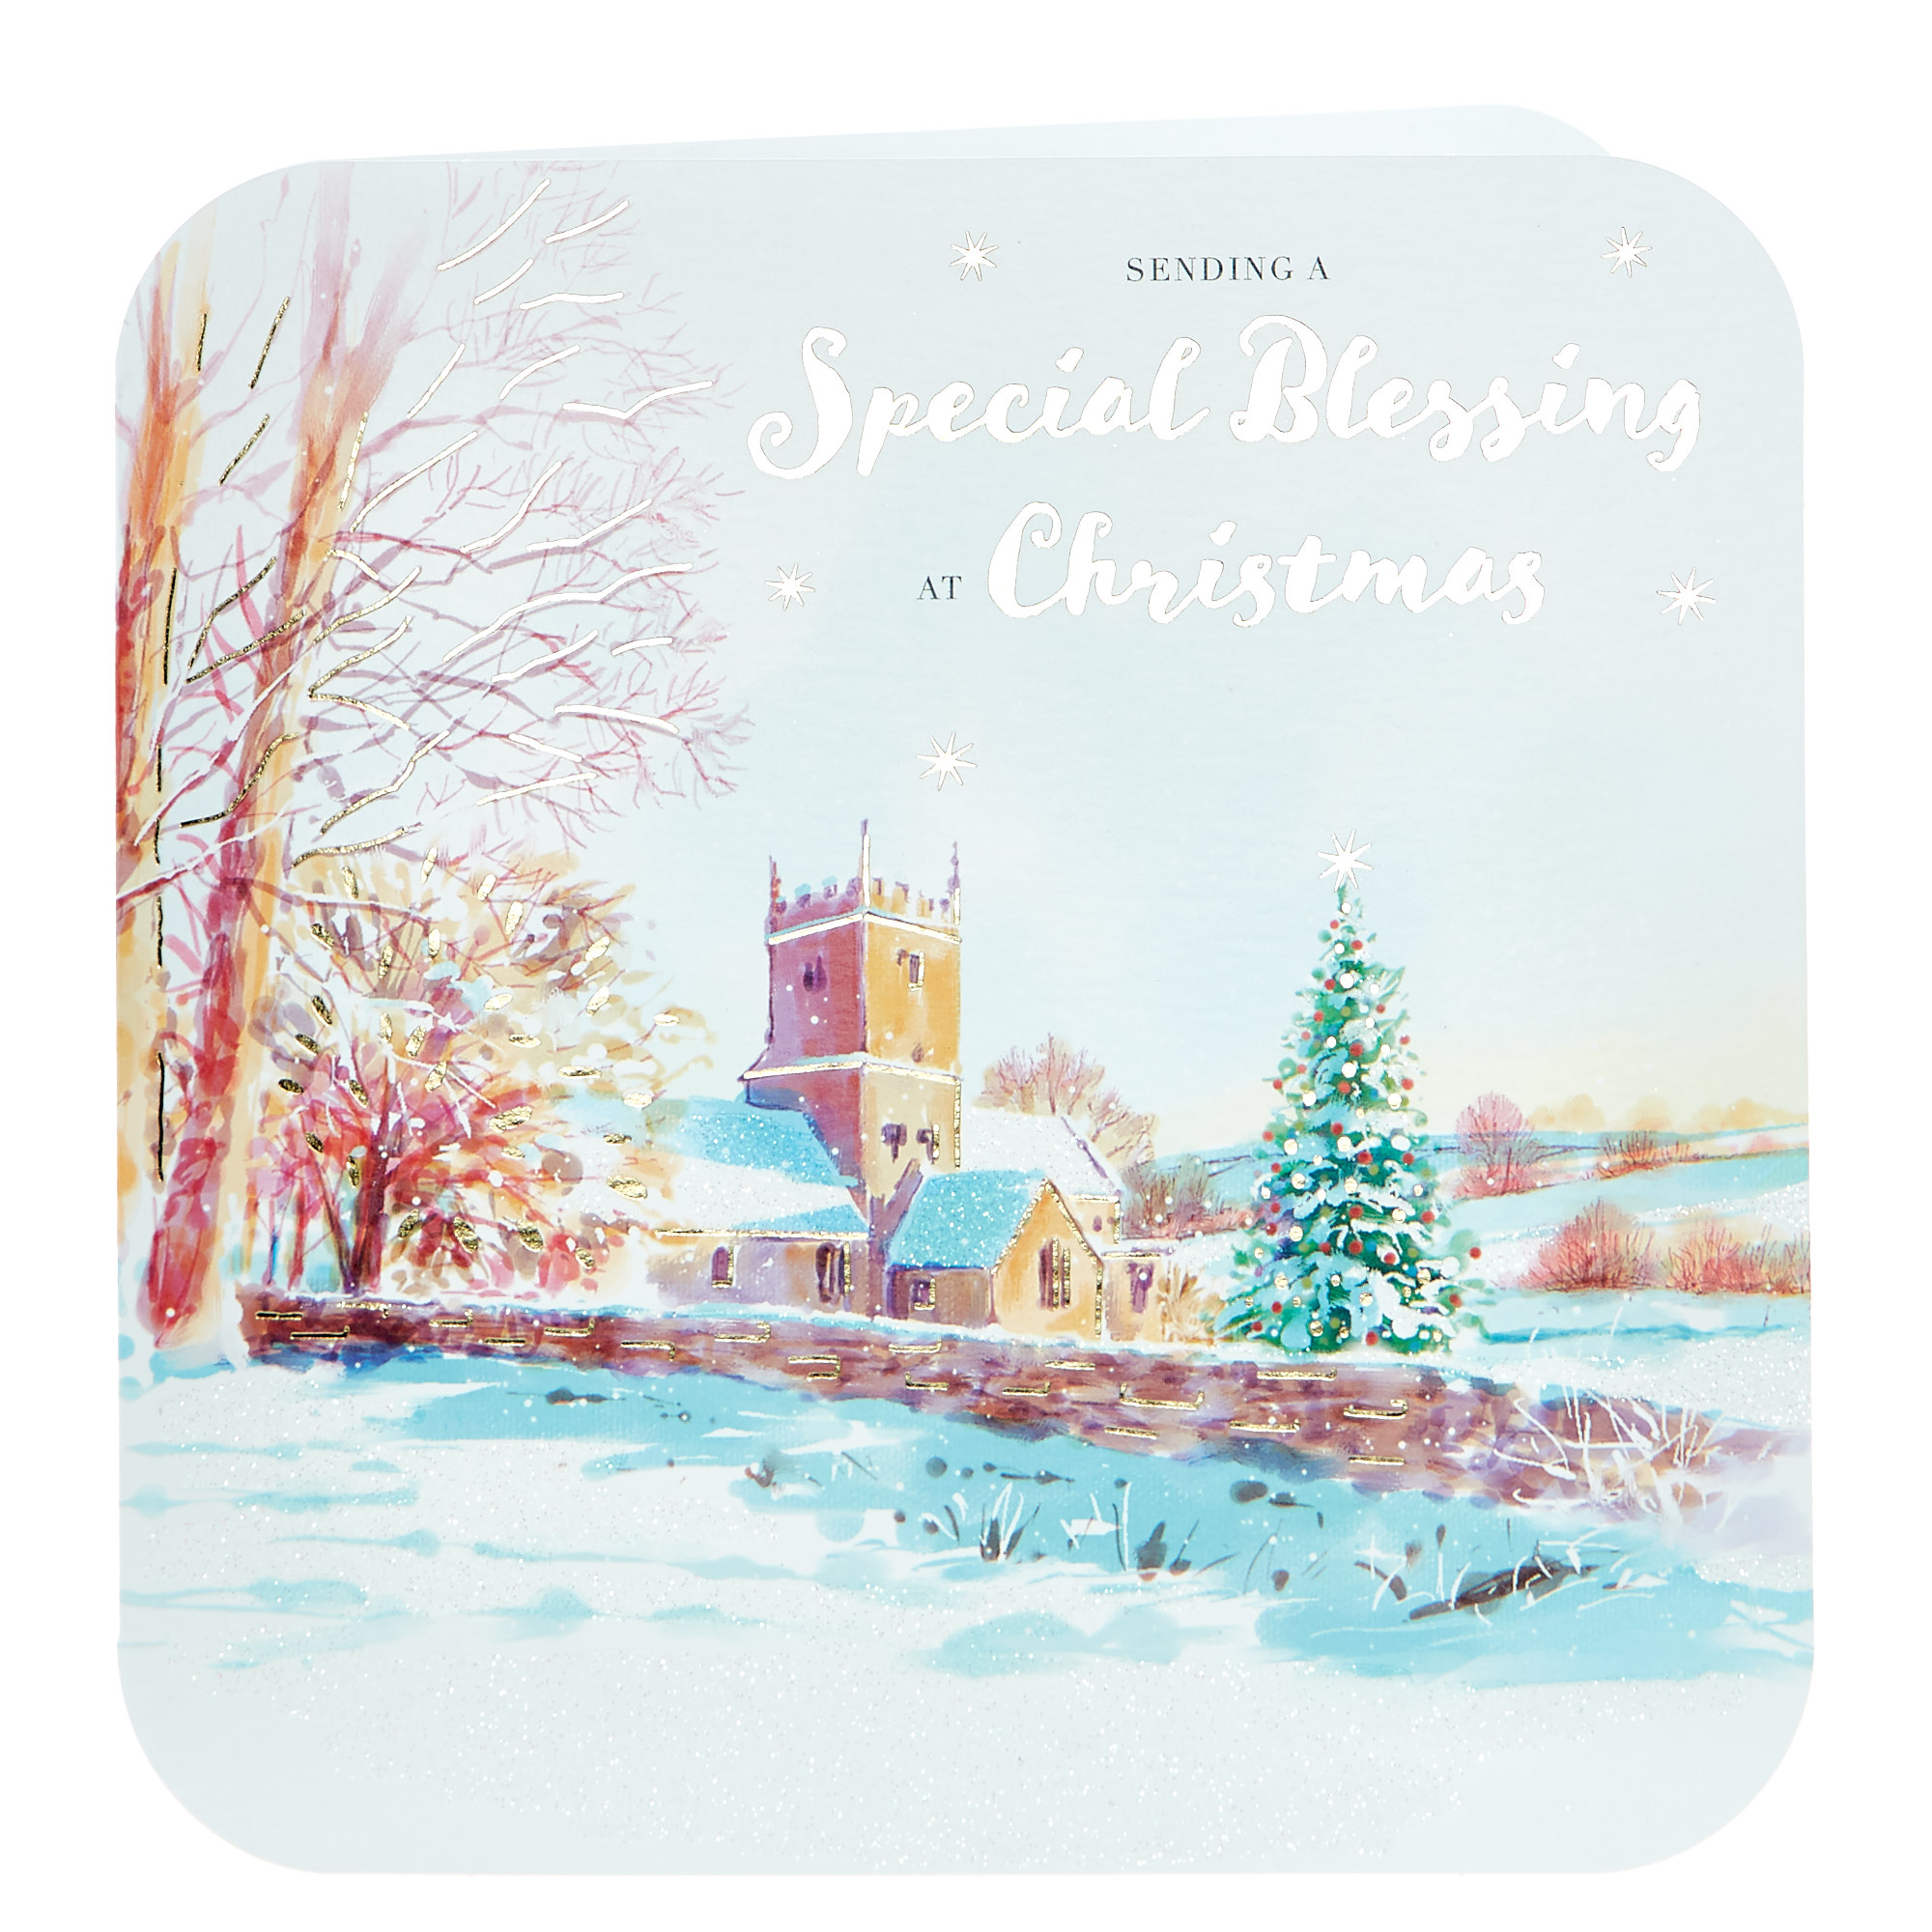 Platinum Collection Christmas Card - A Special Blessing 